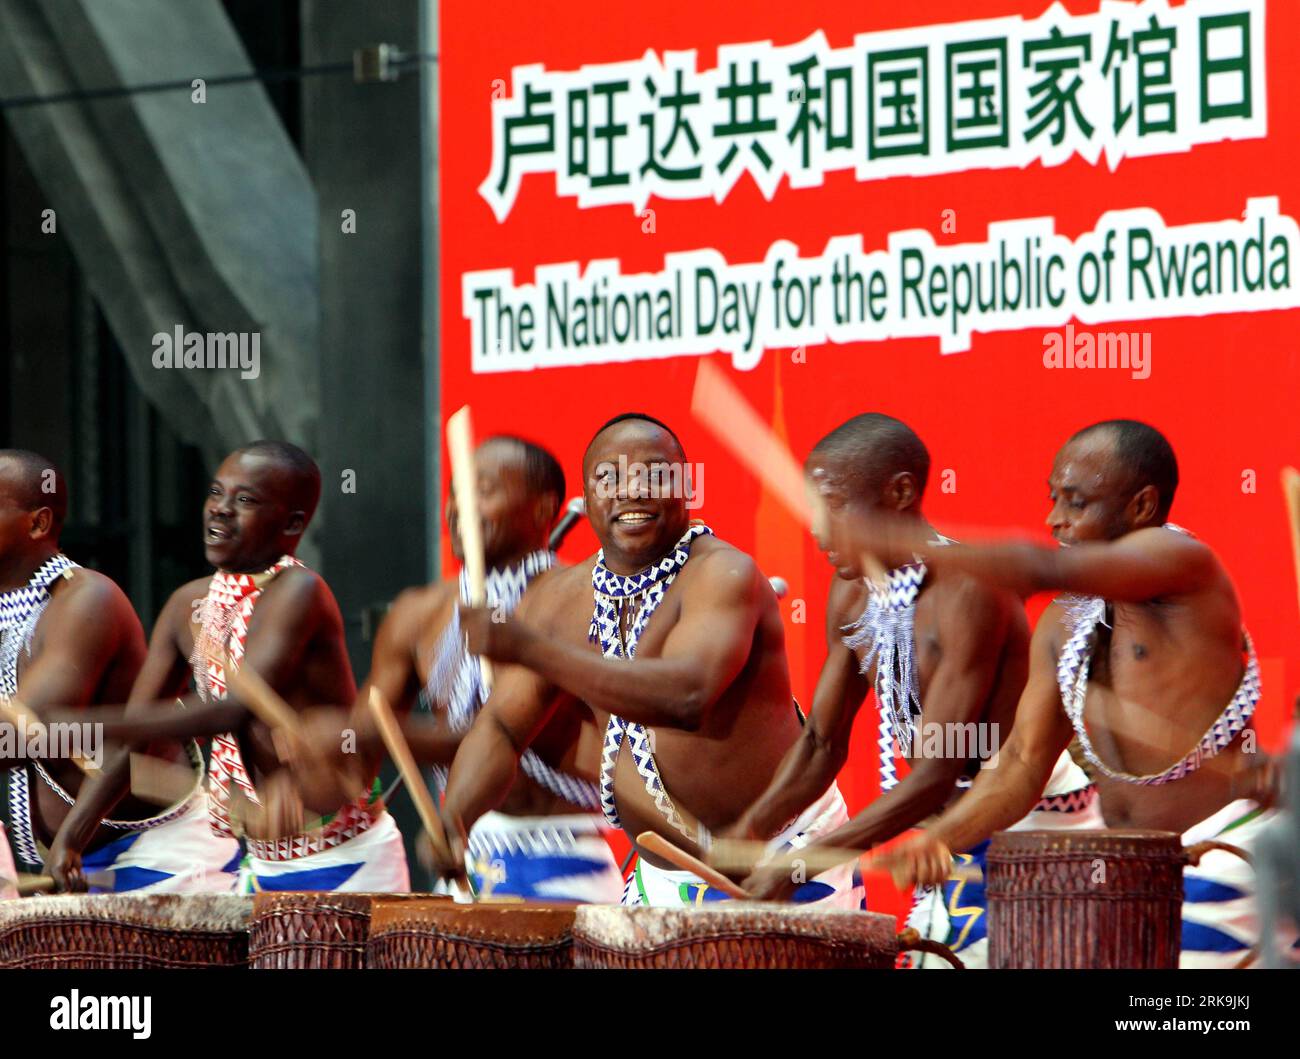 Bildnummer: 54203445  Datum: 04.07.2010  Copyright: imago/Xinhua (100704) -- SHANGHAI, July 4, 2010 (Xinhua) -- Artists perform during a ceremony marking the National Day for the Republic of Rwanda at the World Expo Park in Shanghai, east China, July 4, 2010. (Xinhua/Fan Jun) (zl) (10)WORLD EXPO-RWANDA-NATIONAL PAVILION DAY (CN) PUBLICATIONxNOTxINxCHN Gesellschaft Land und Leute Nationalfeiertag Ruanda EXPO Folklore Tanz Kultur kbdig xdp 2010 quer     Bildnummer 54203445 Date 04 07 2010 Copyright Imago XINHUA  Shanghai July 4 2010 XINHUA Artists perform during a Ceremony marking The National D Stock Photo